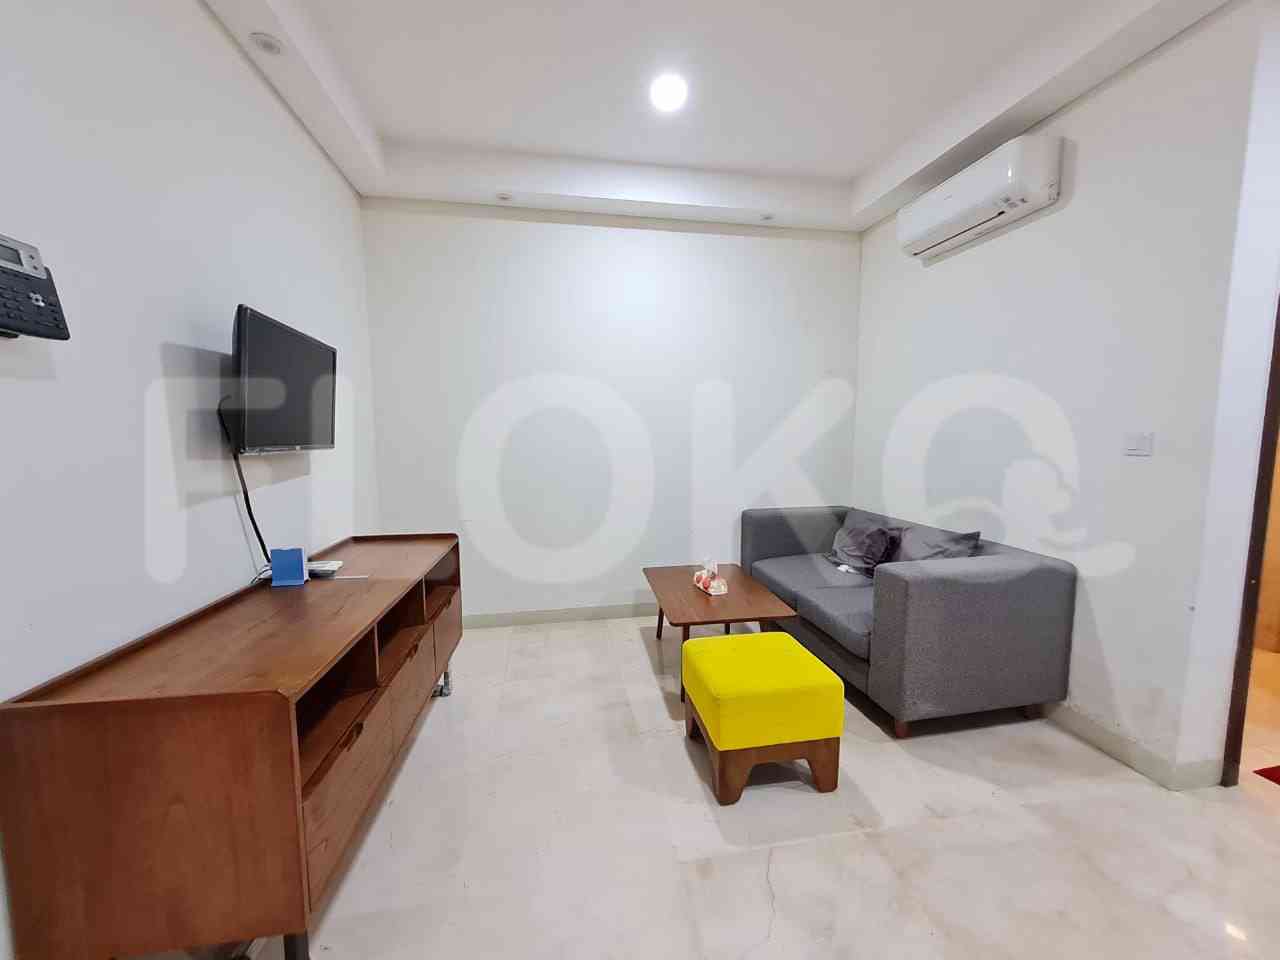 2 Bedroom on 18th Floor for Rent in Lavanue Apartment - fpa481 2